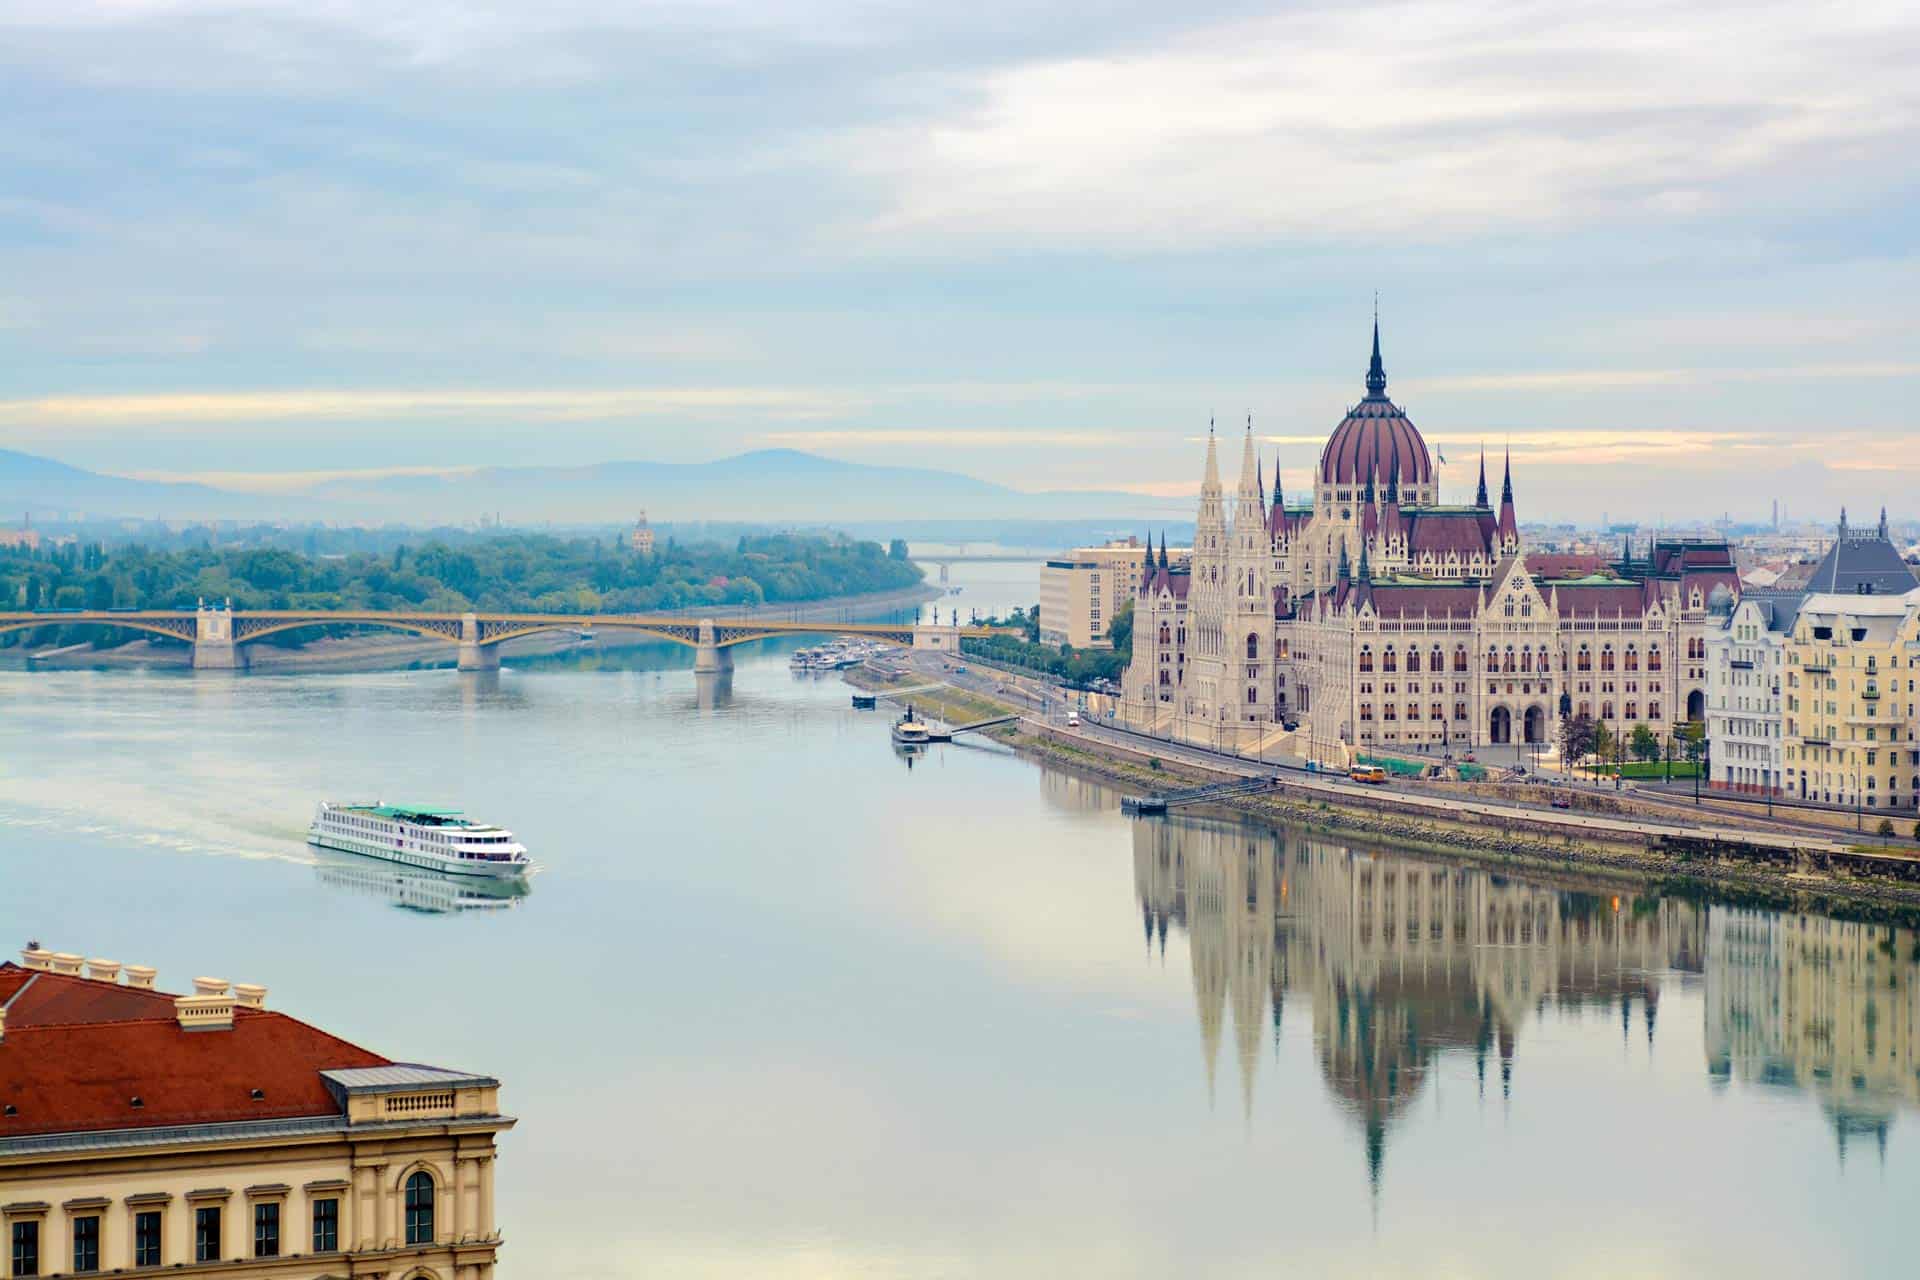 The view of Budapest and the Danube River